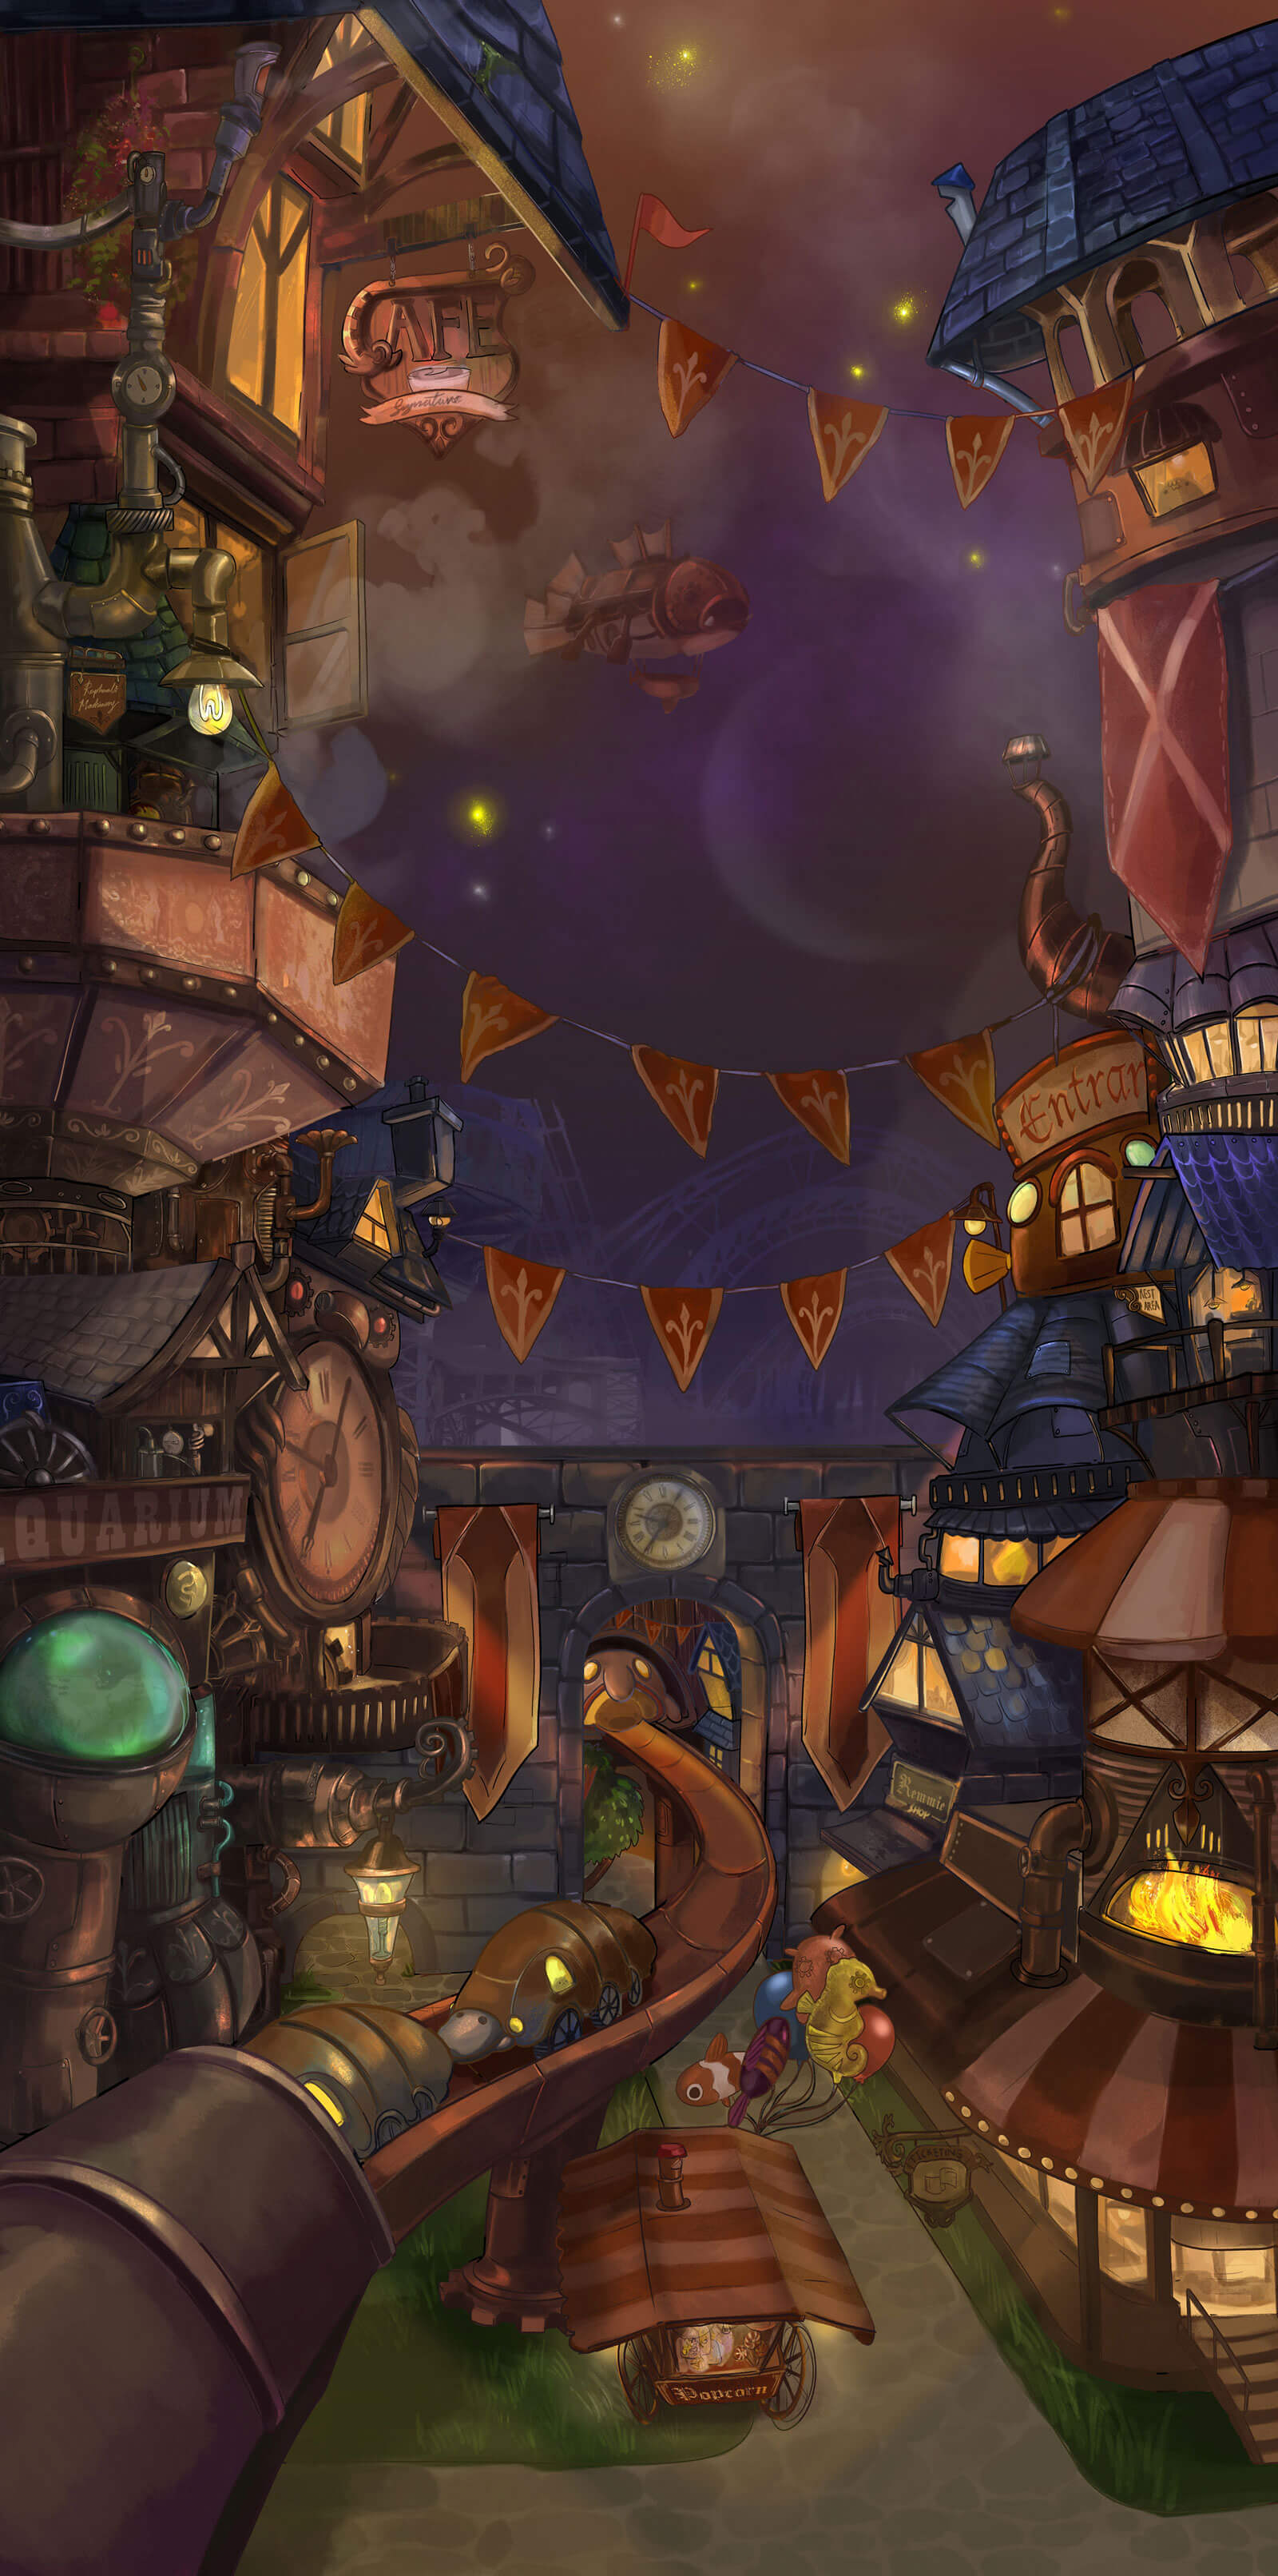 A lively, steampunk-style city scene at night.